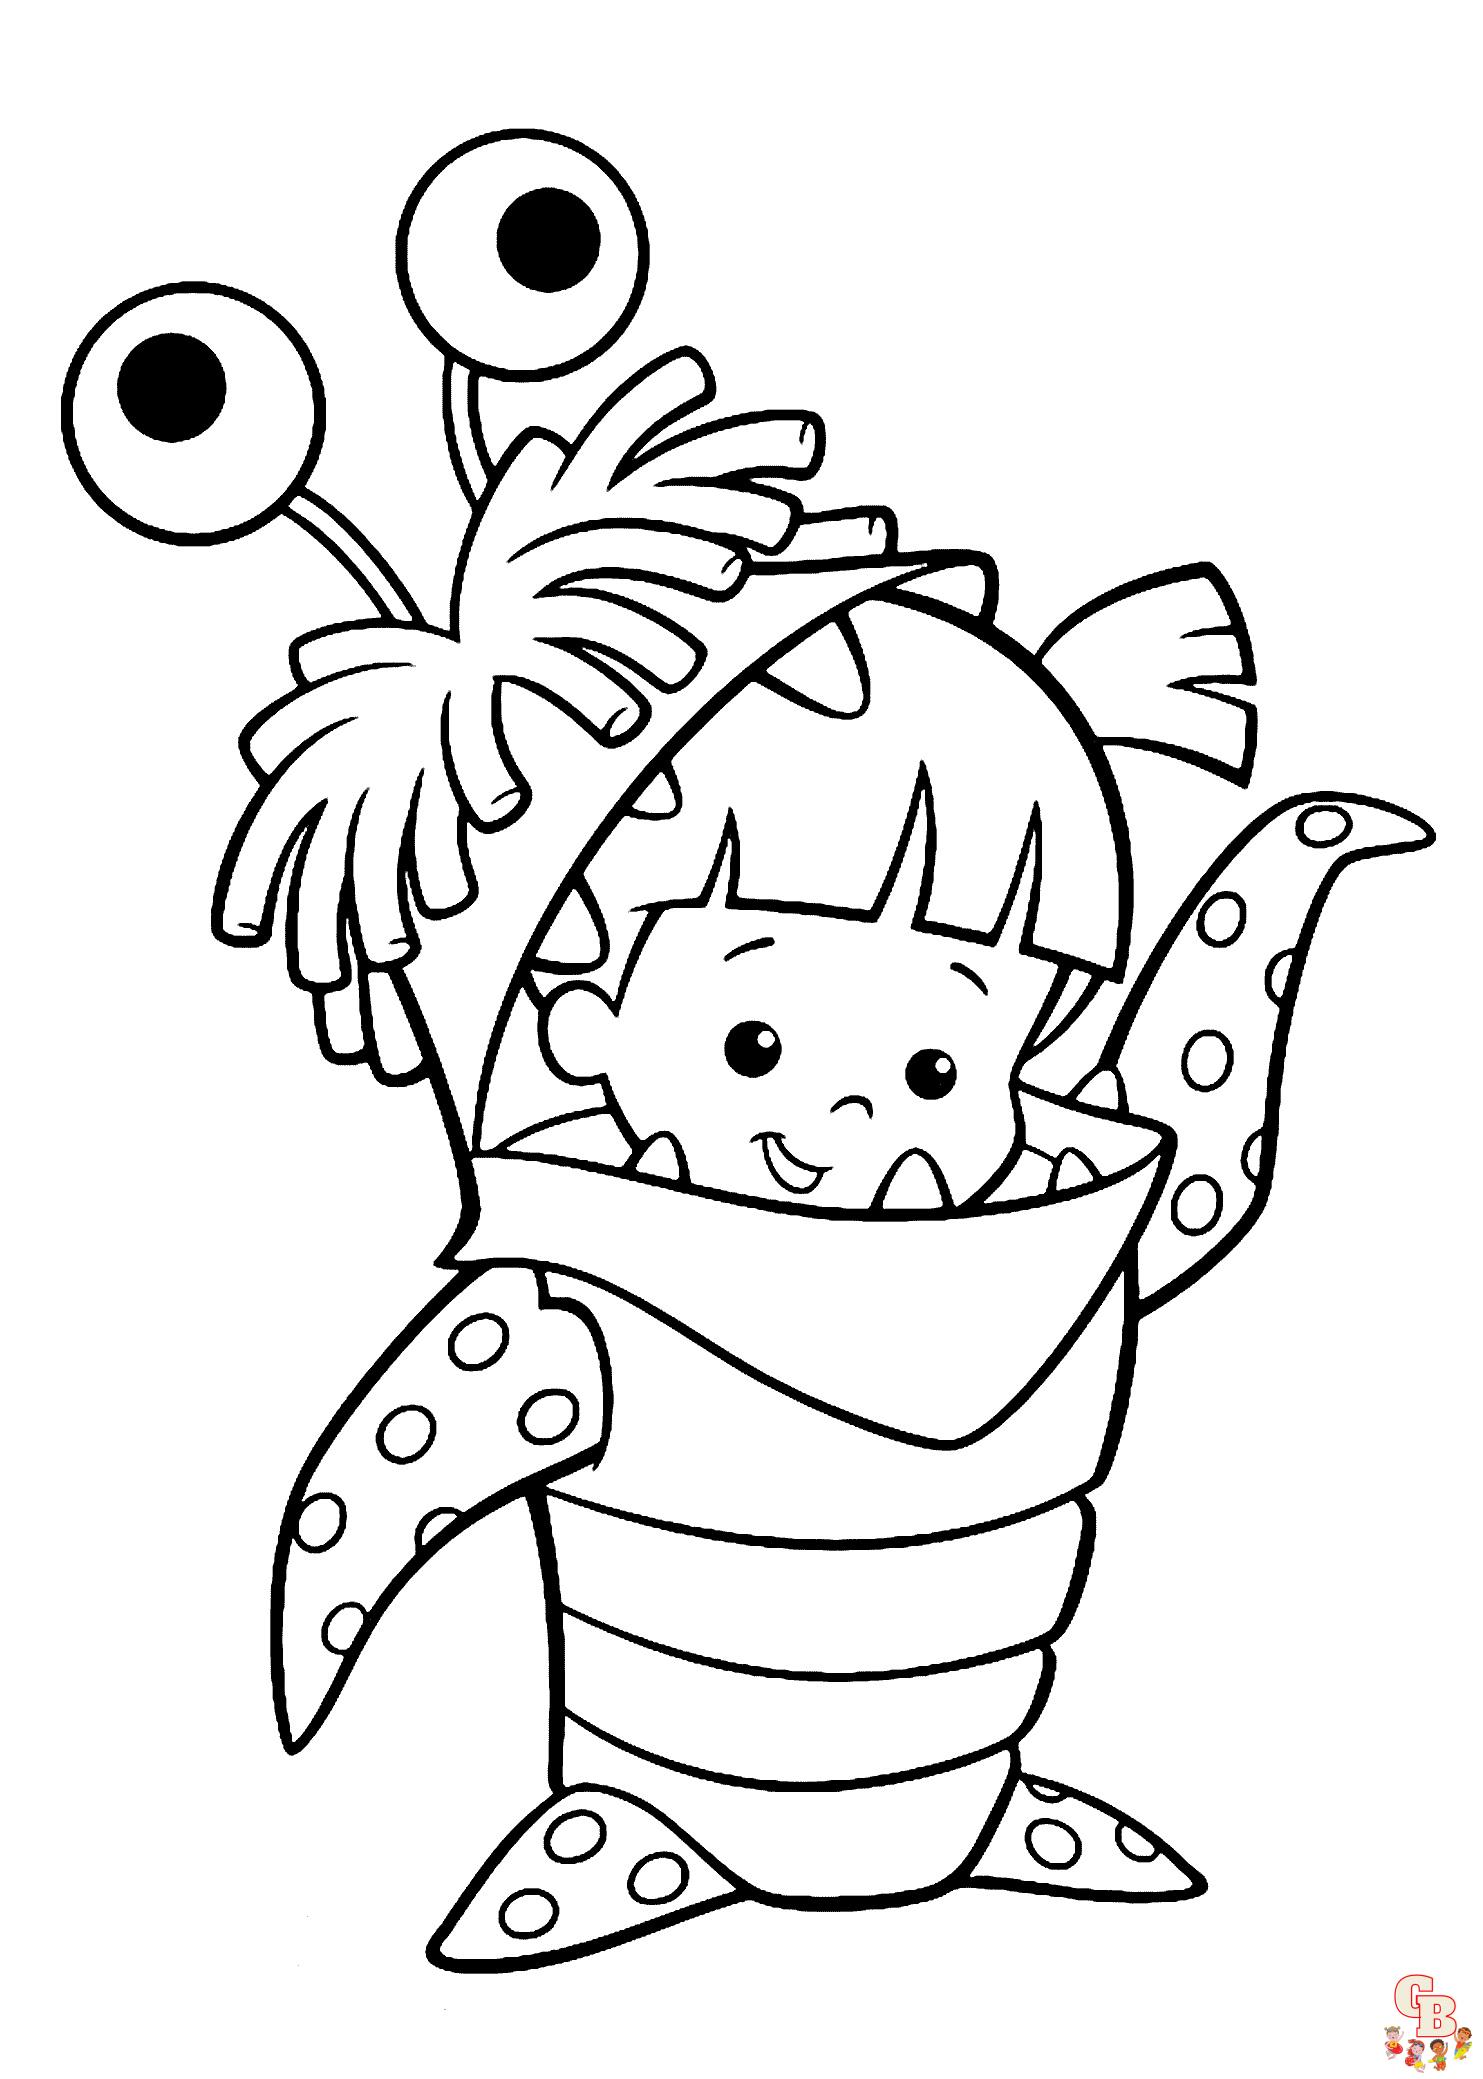 Monsters Inc Coloring Pages Printable for Free Download